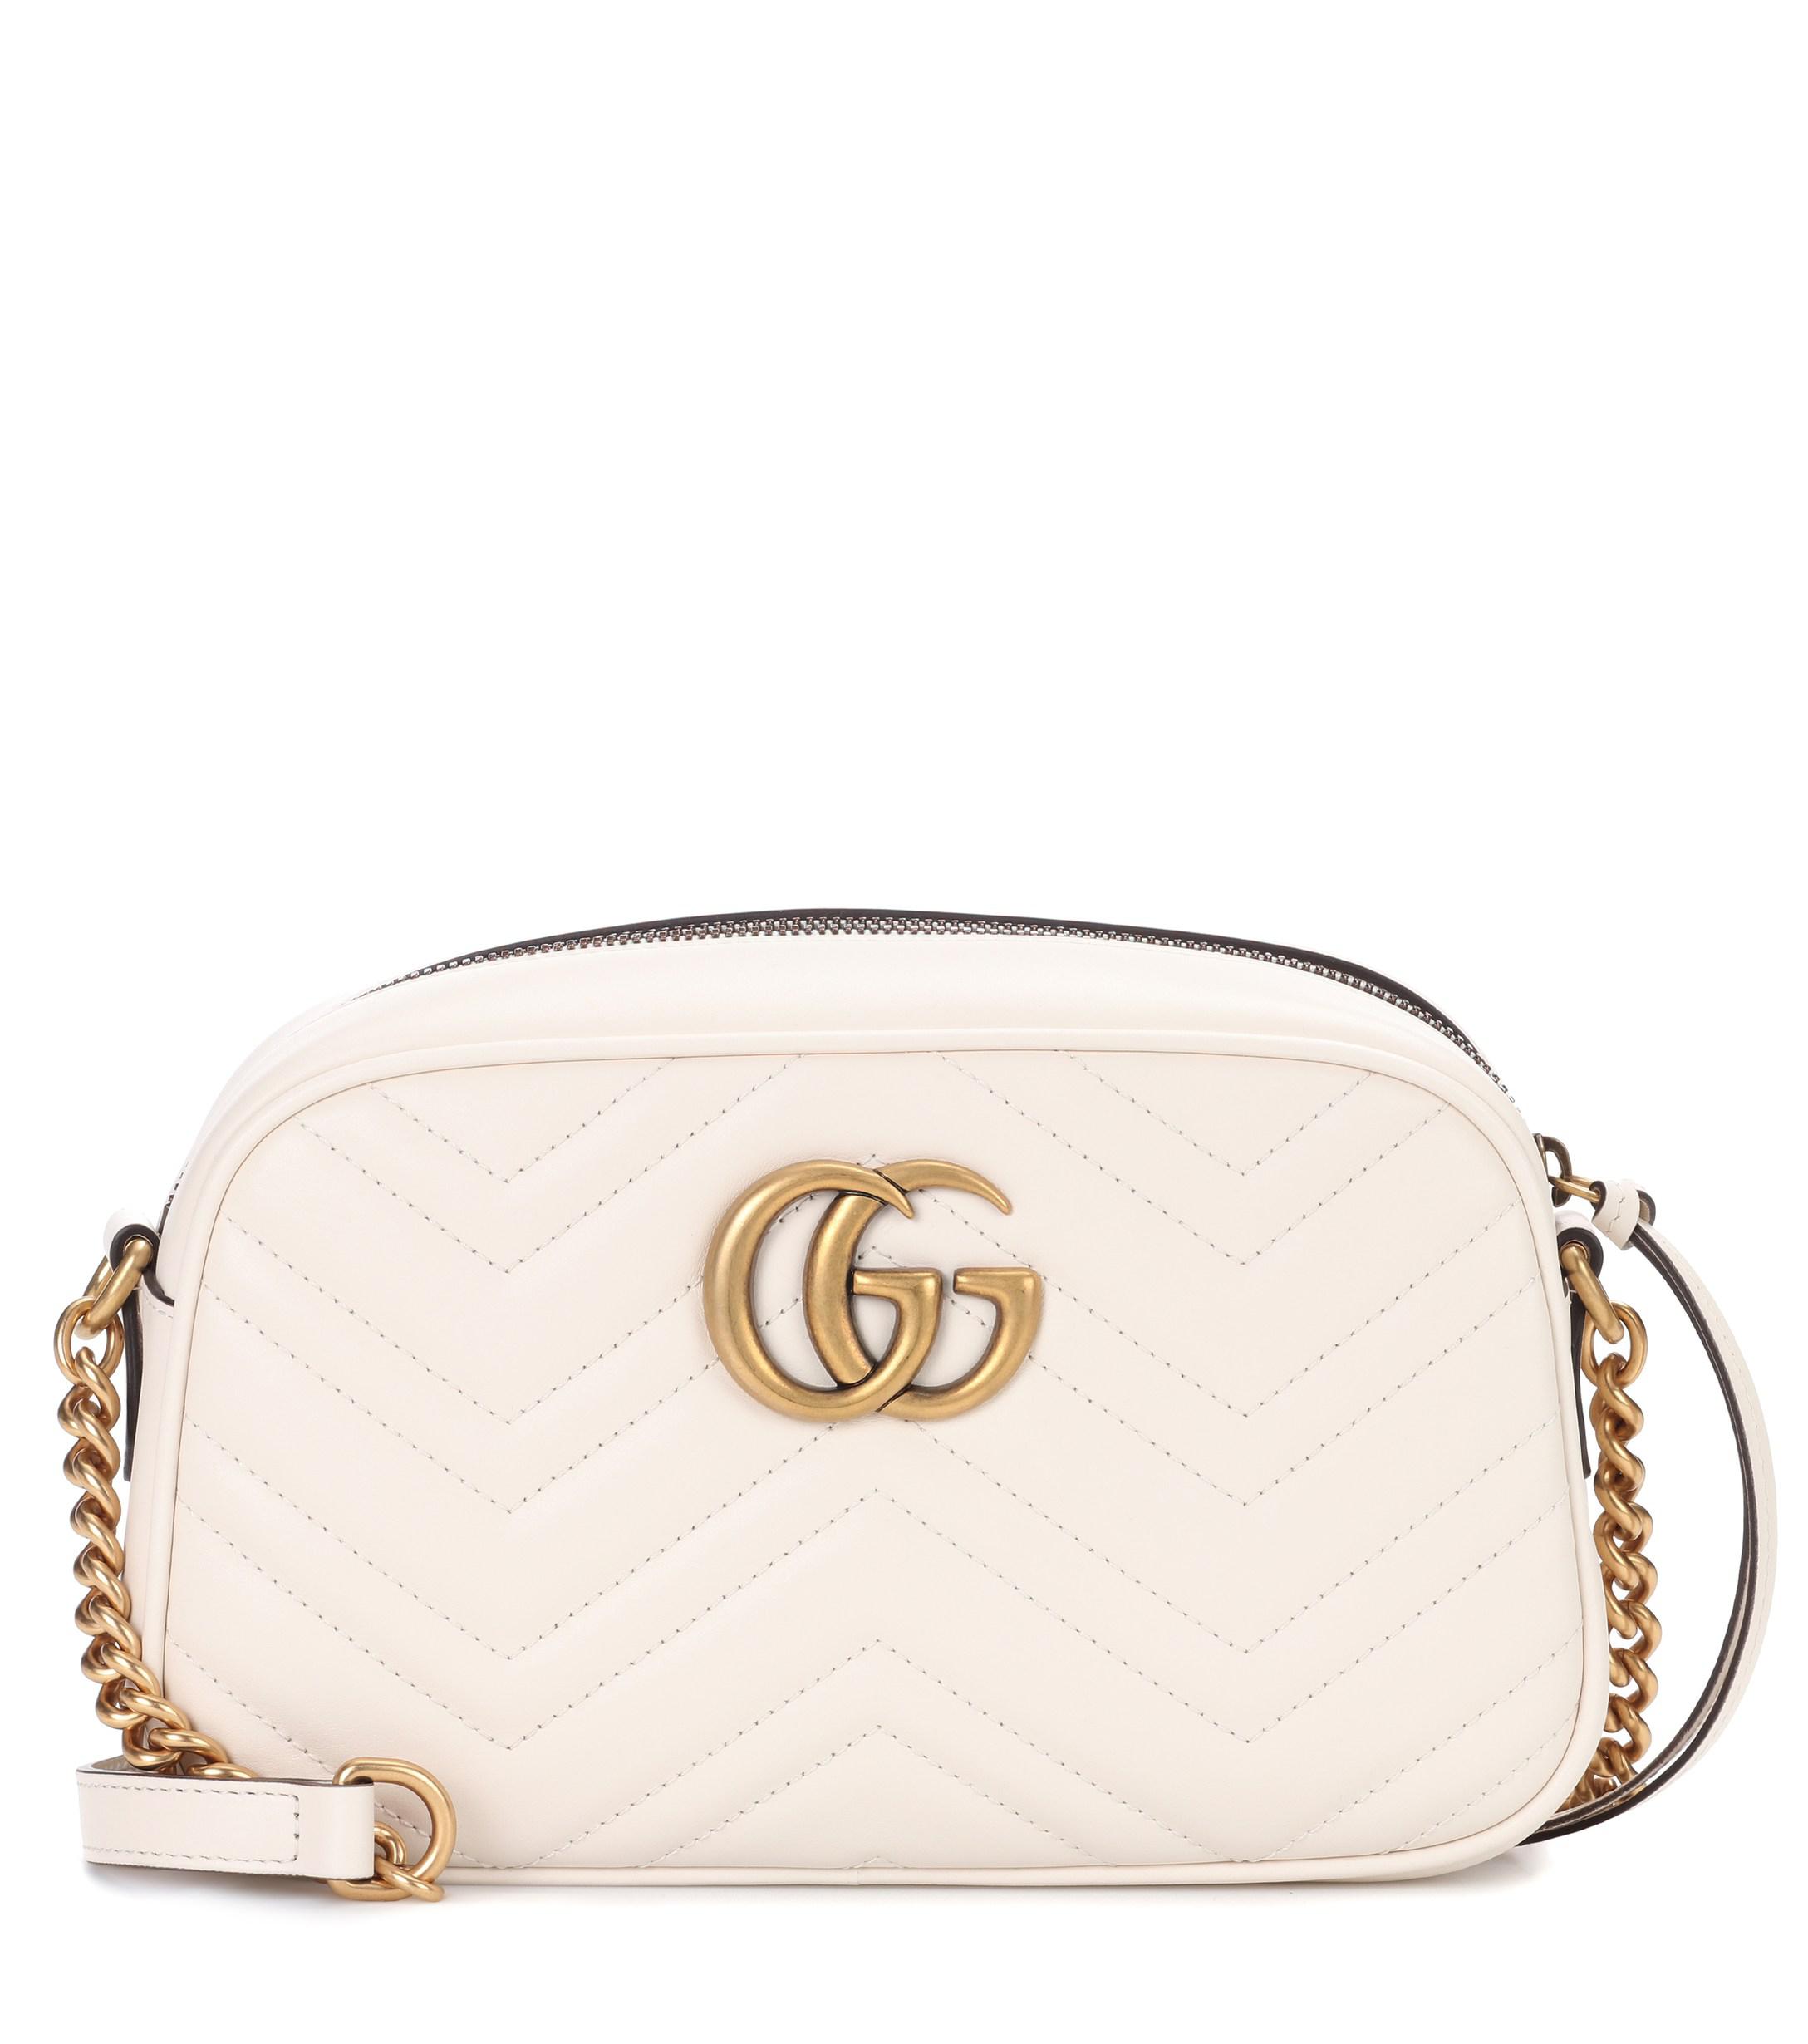 Gucci GG Marmont Leather Crossbody Bag in White - Lyst